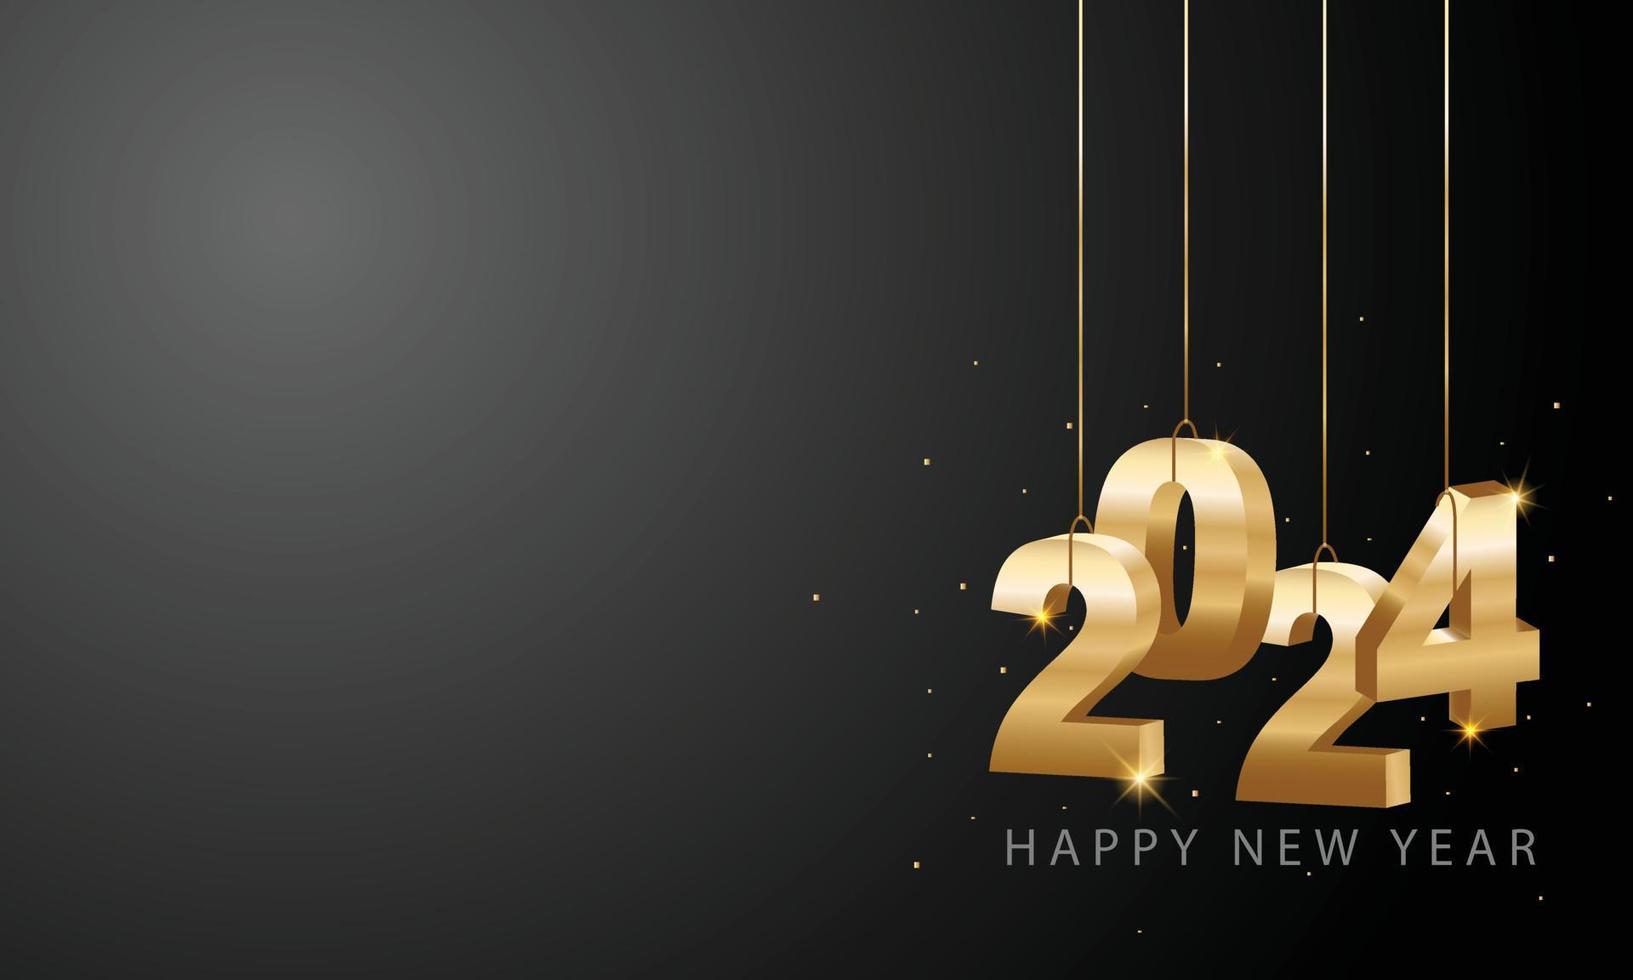 Happy New Year 2024. Hanging golden 3D numbers with ribbons and confetti. Holiday greeting card design. Vector illustration.